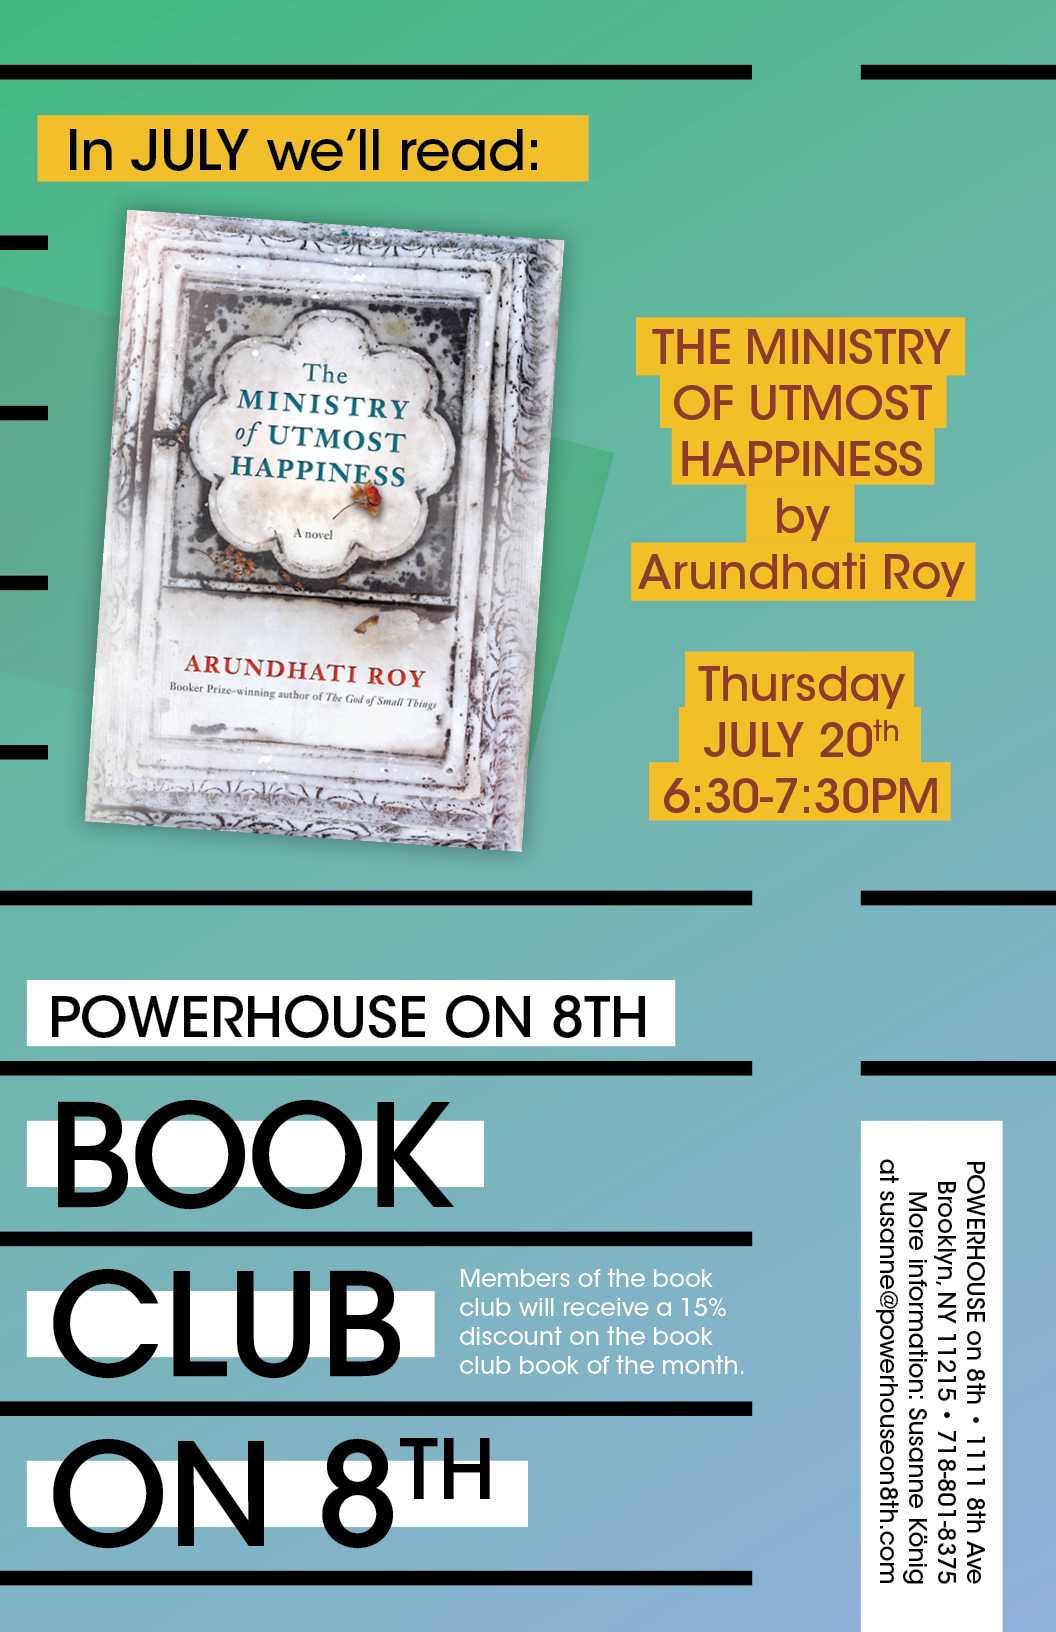 Book Club on 8th: The Ministry of Utmost Happiness by Arundhati Roy